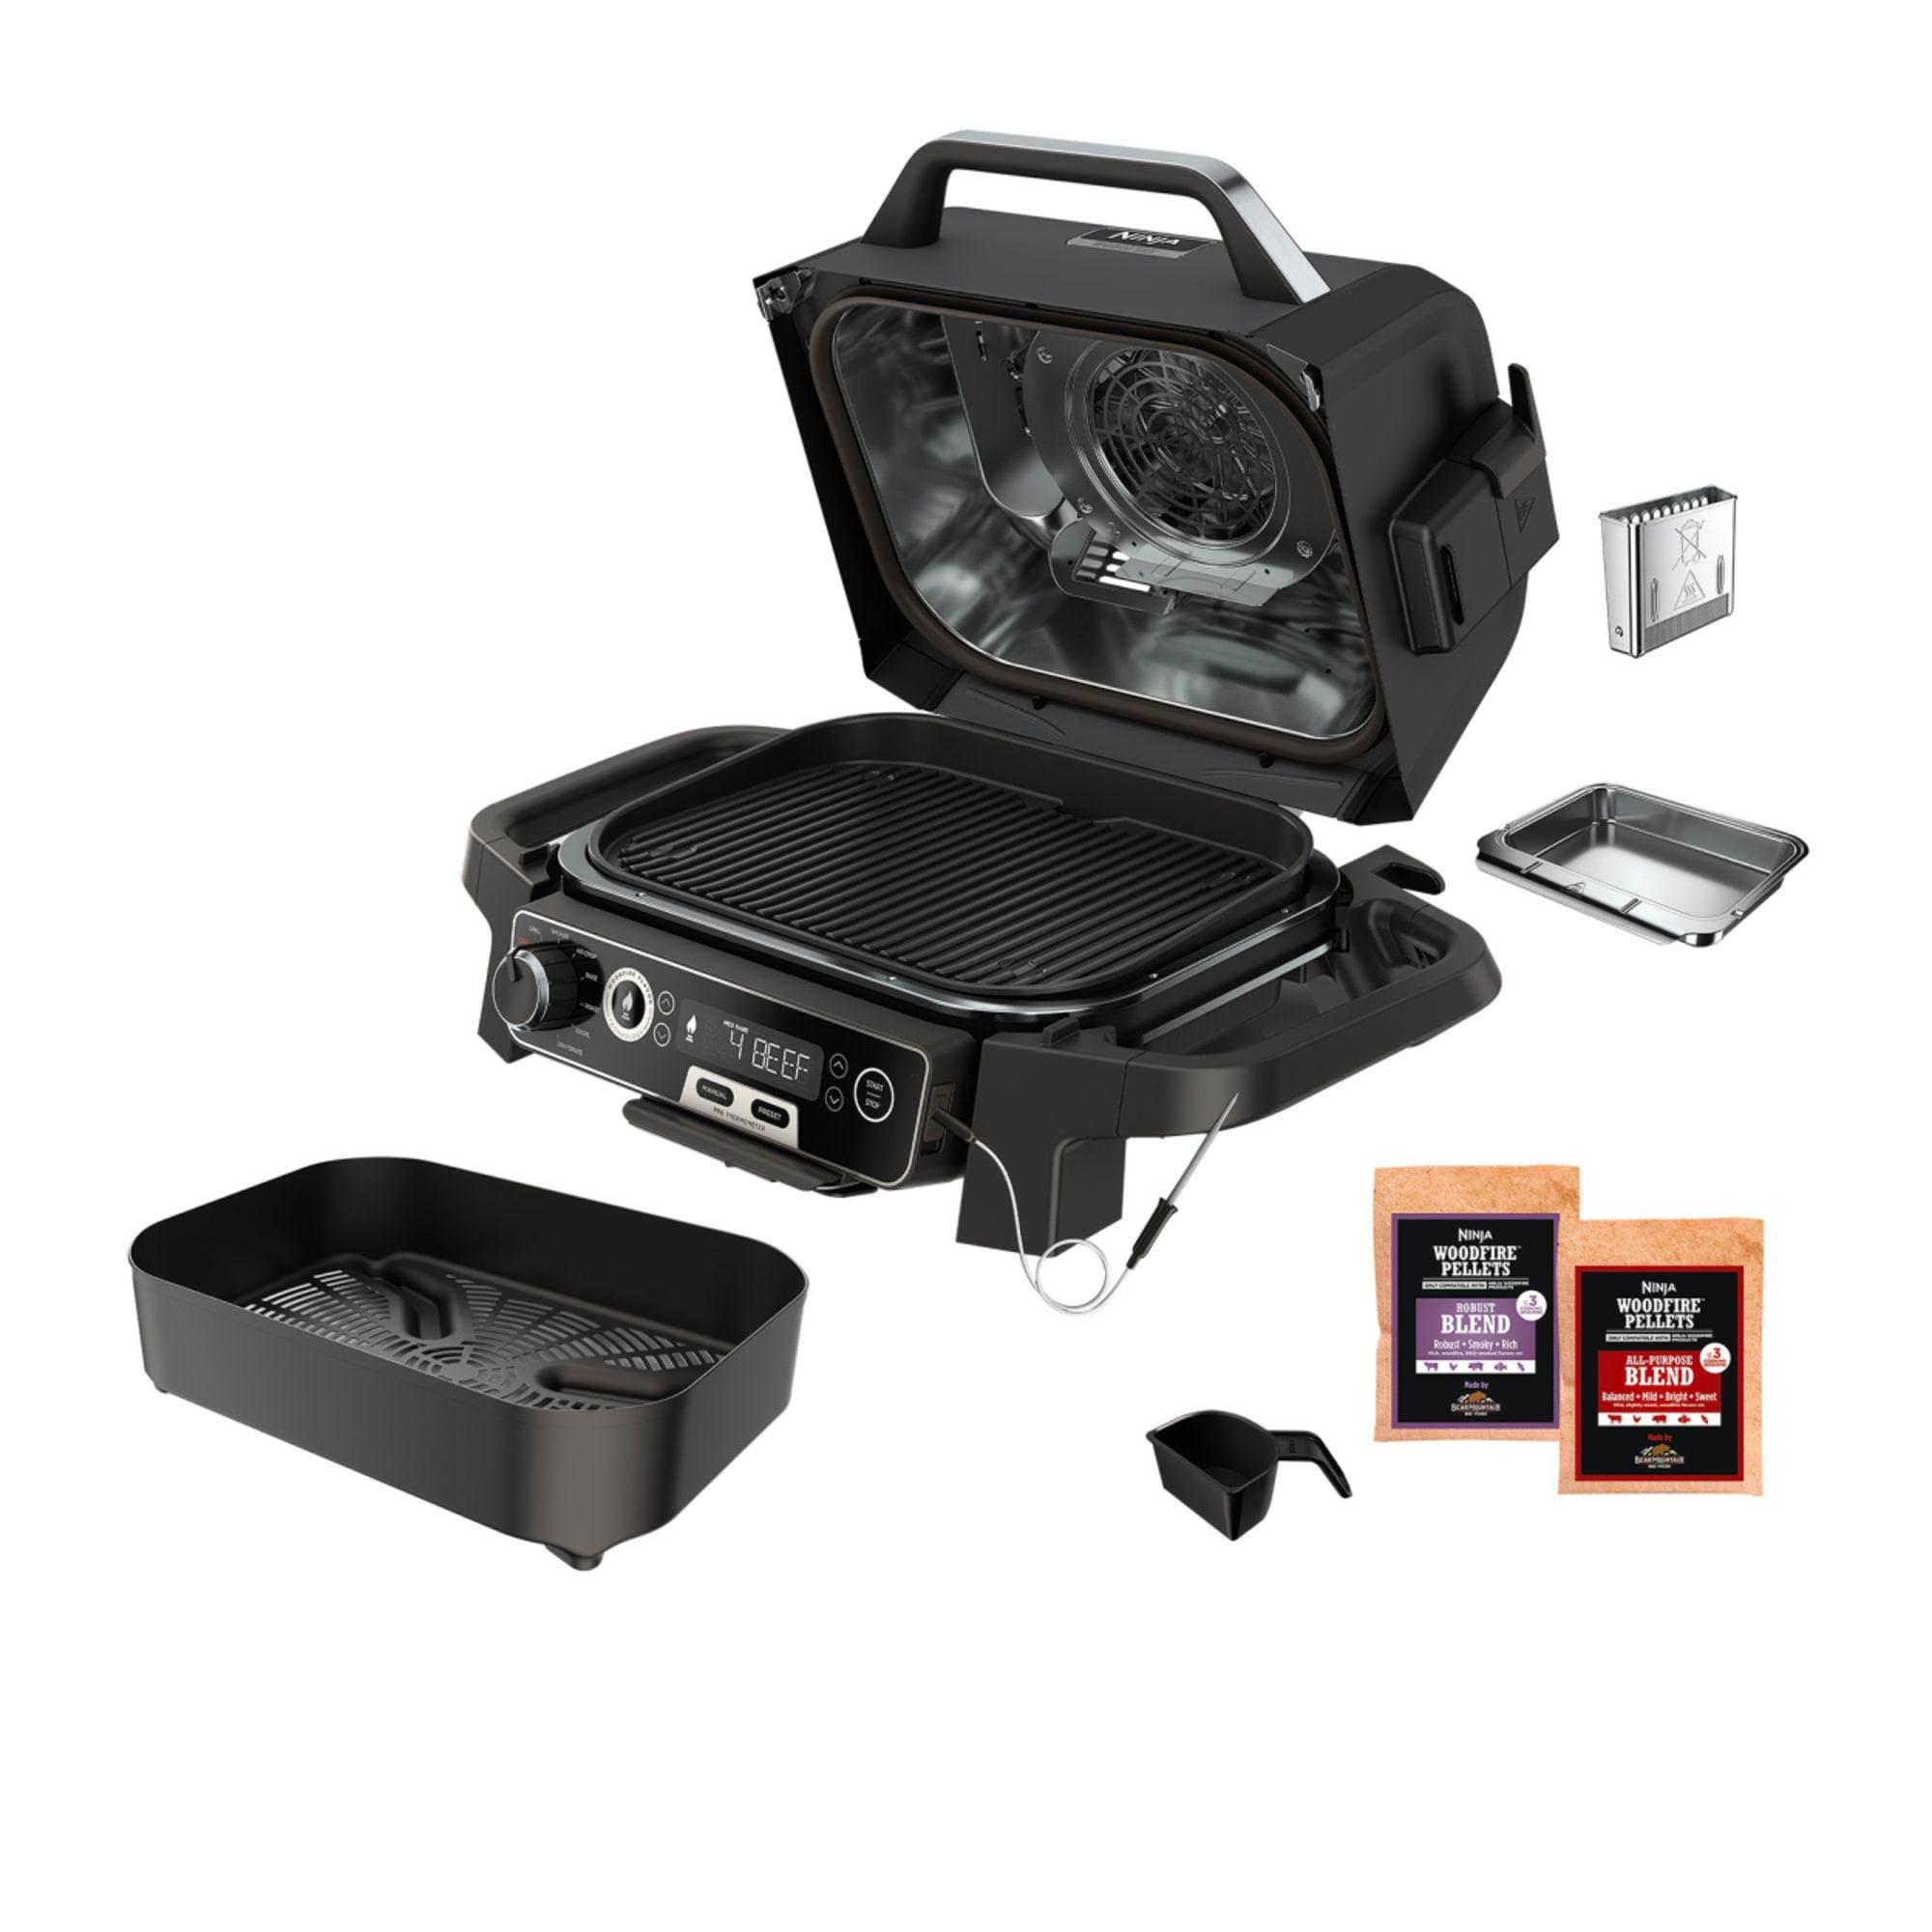 Ninja Woodfire Pro Outdoor Grill with Smart Probe Image 4